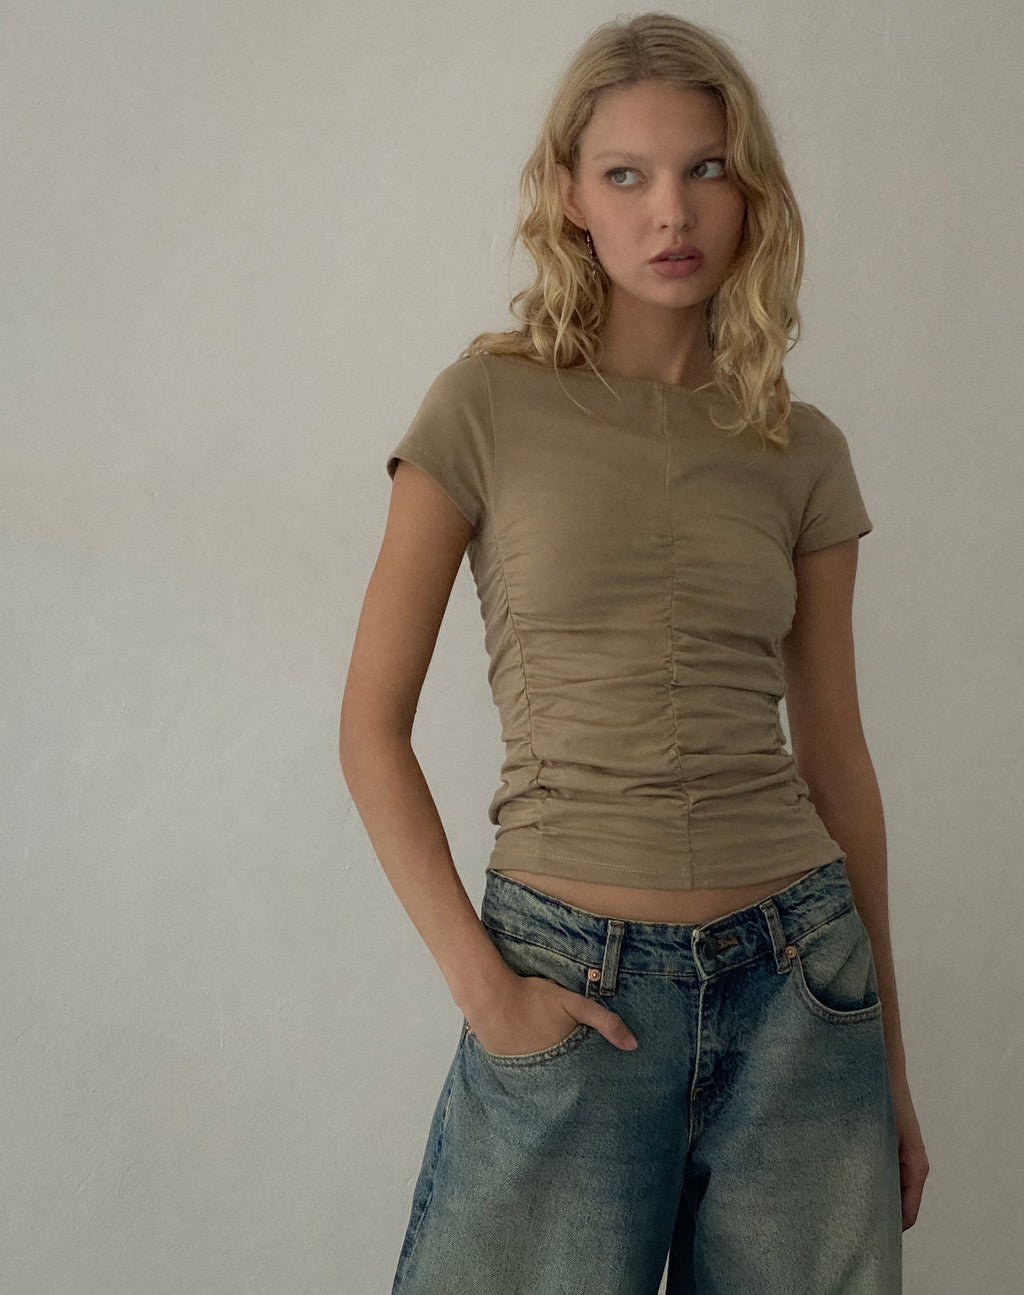 Gryae Ruched Front Top in Biscotti